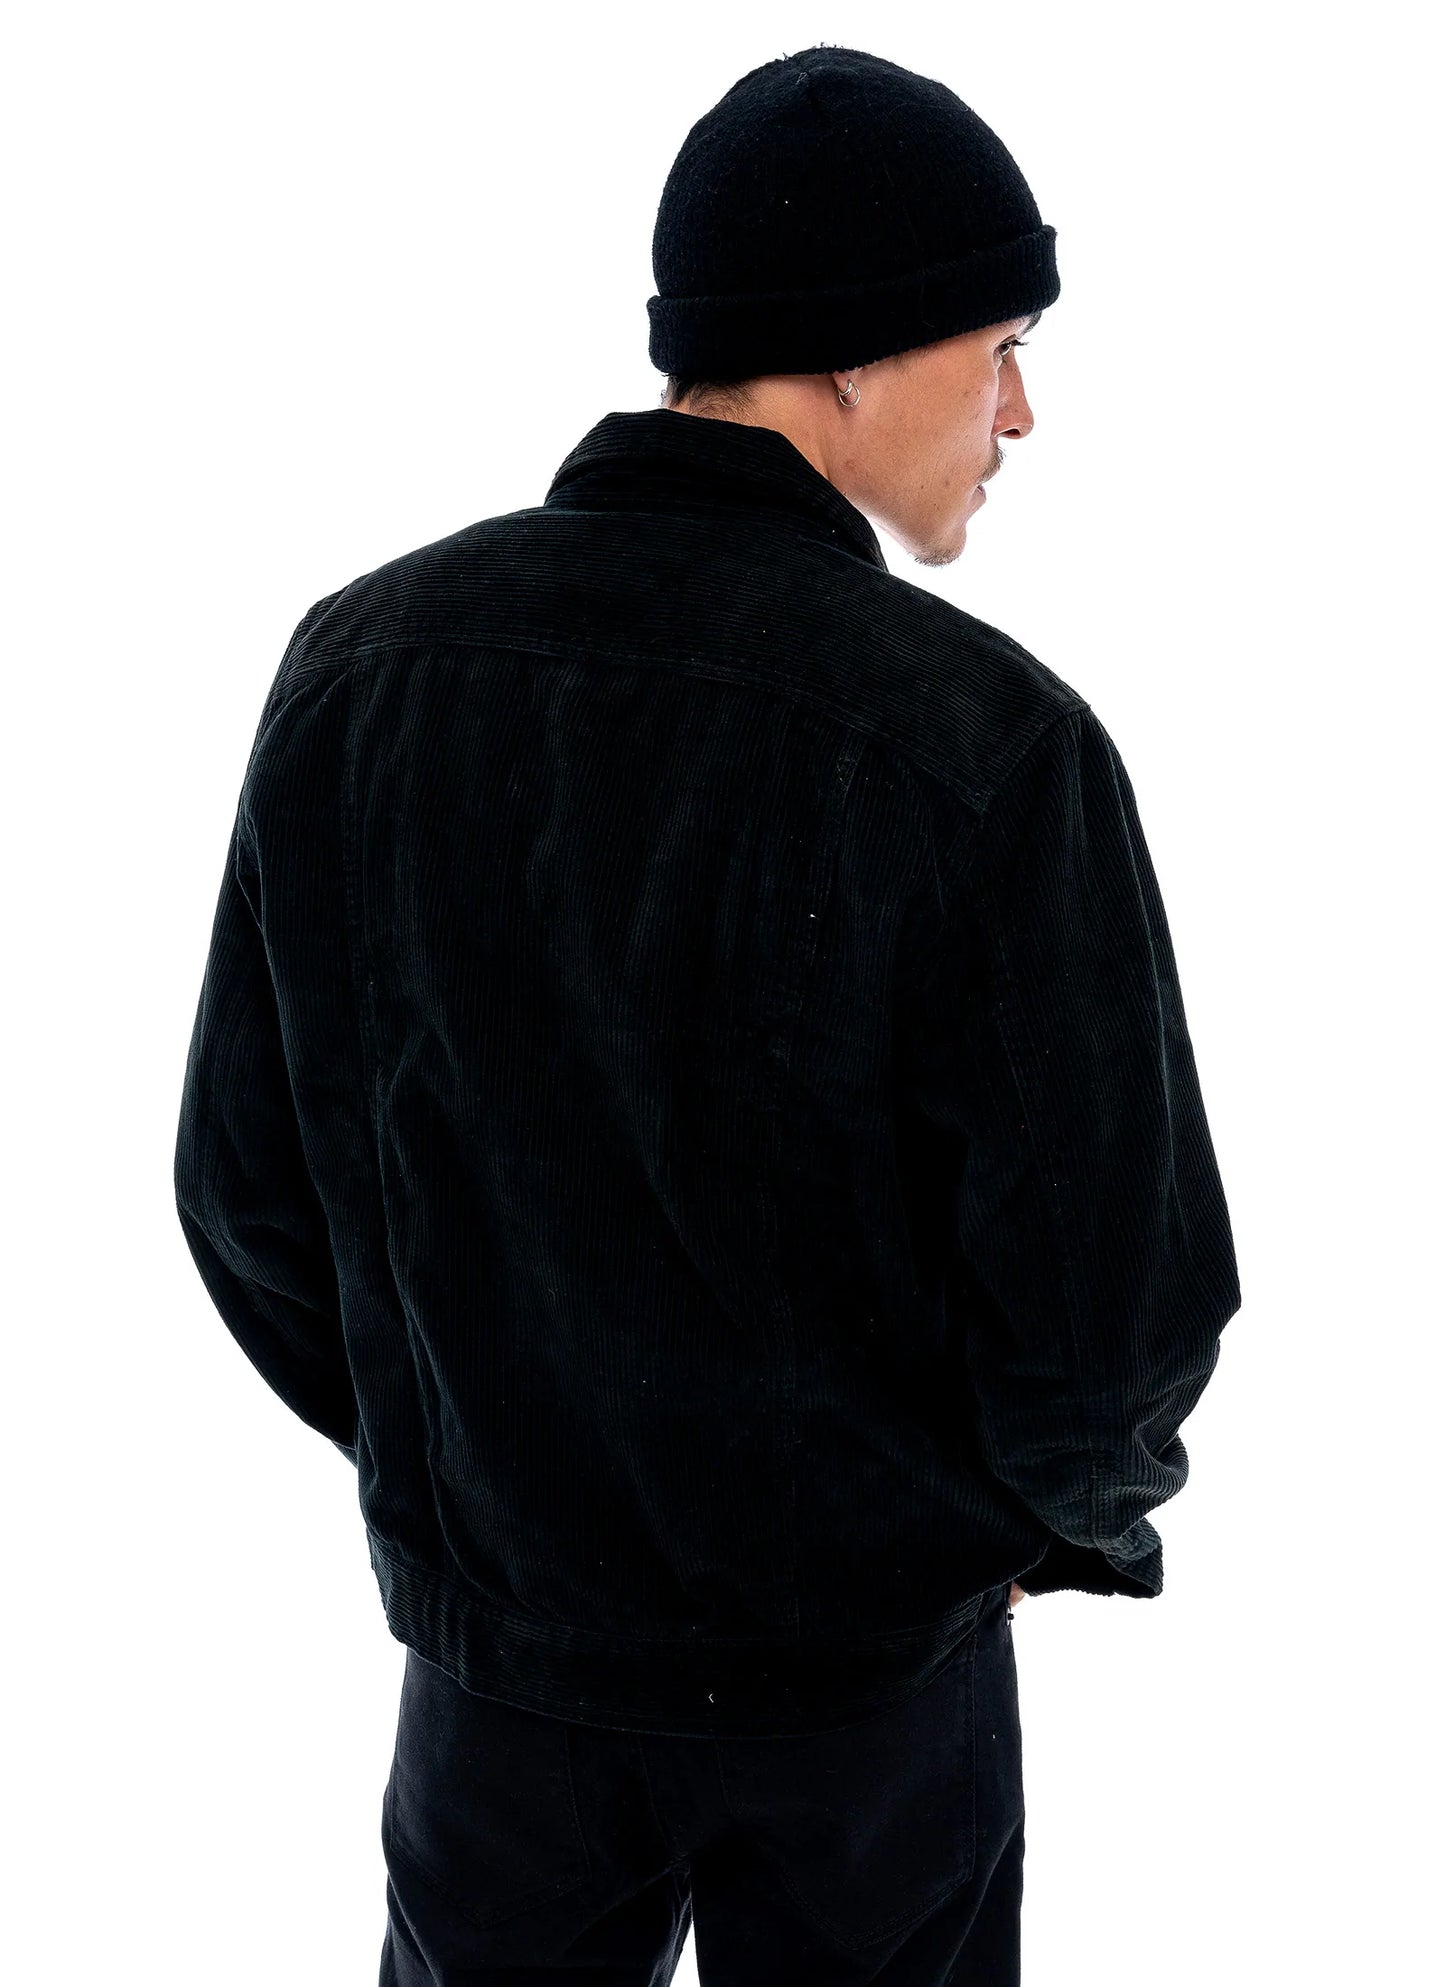 LOST IN NOWHERE // Corduroy Bomber Jacket BLACK